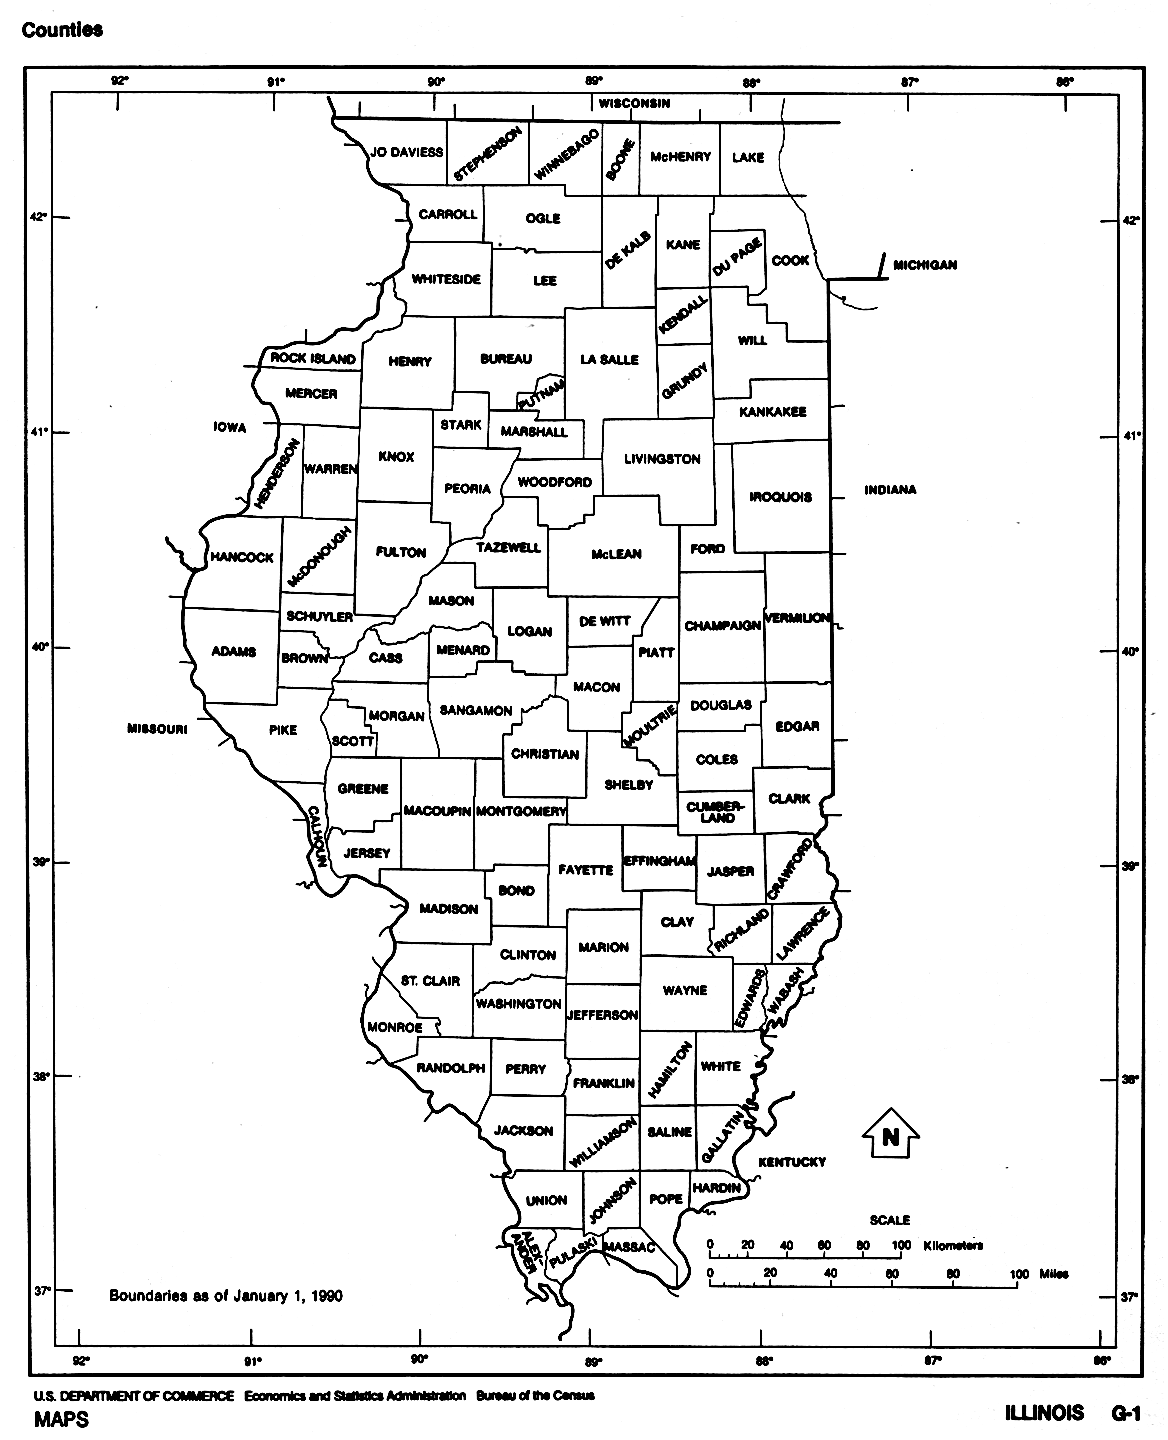 Illinois Counties map with location and outline of each county in IL